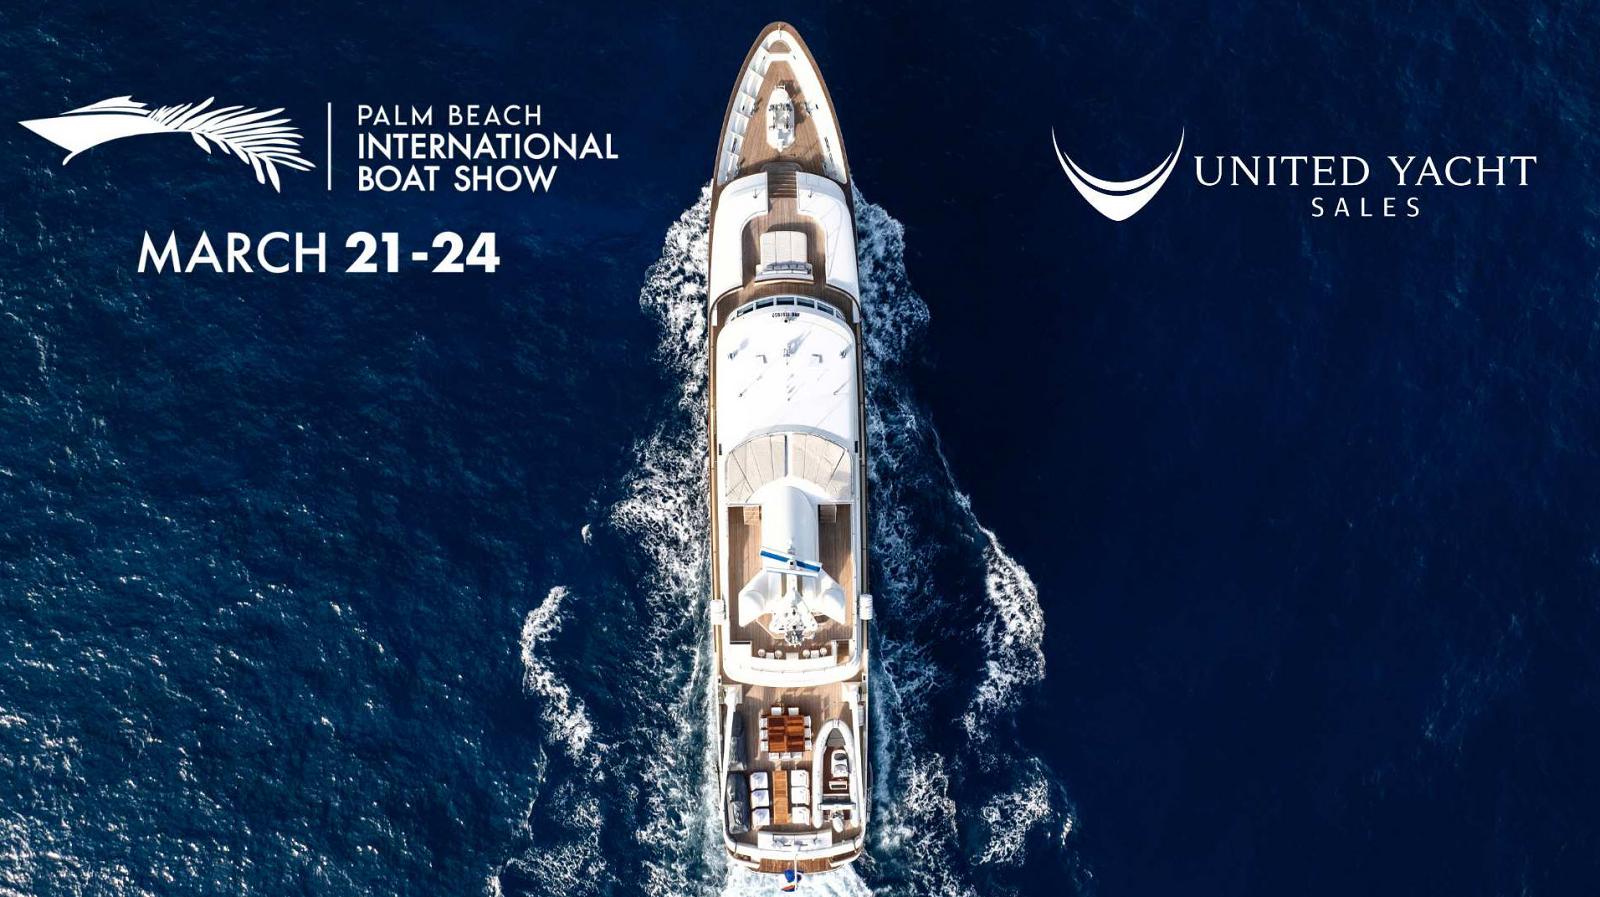 photo of The Palm Beach International Boat Show